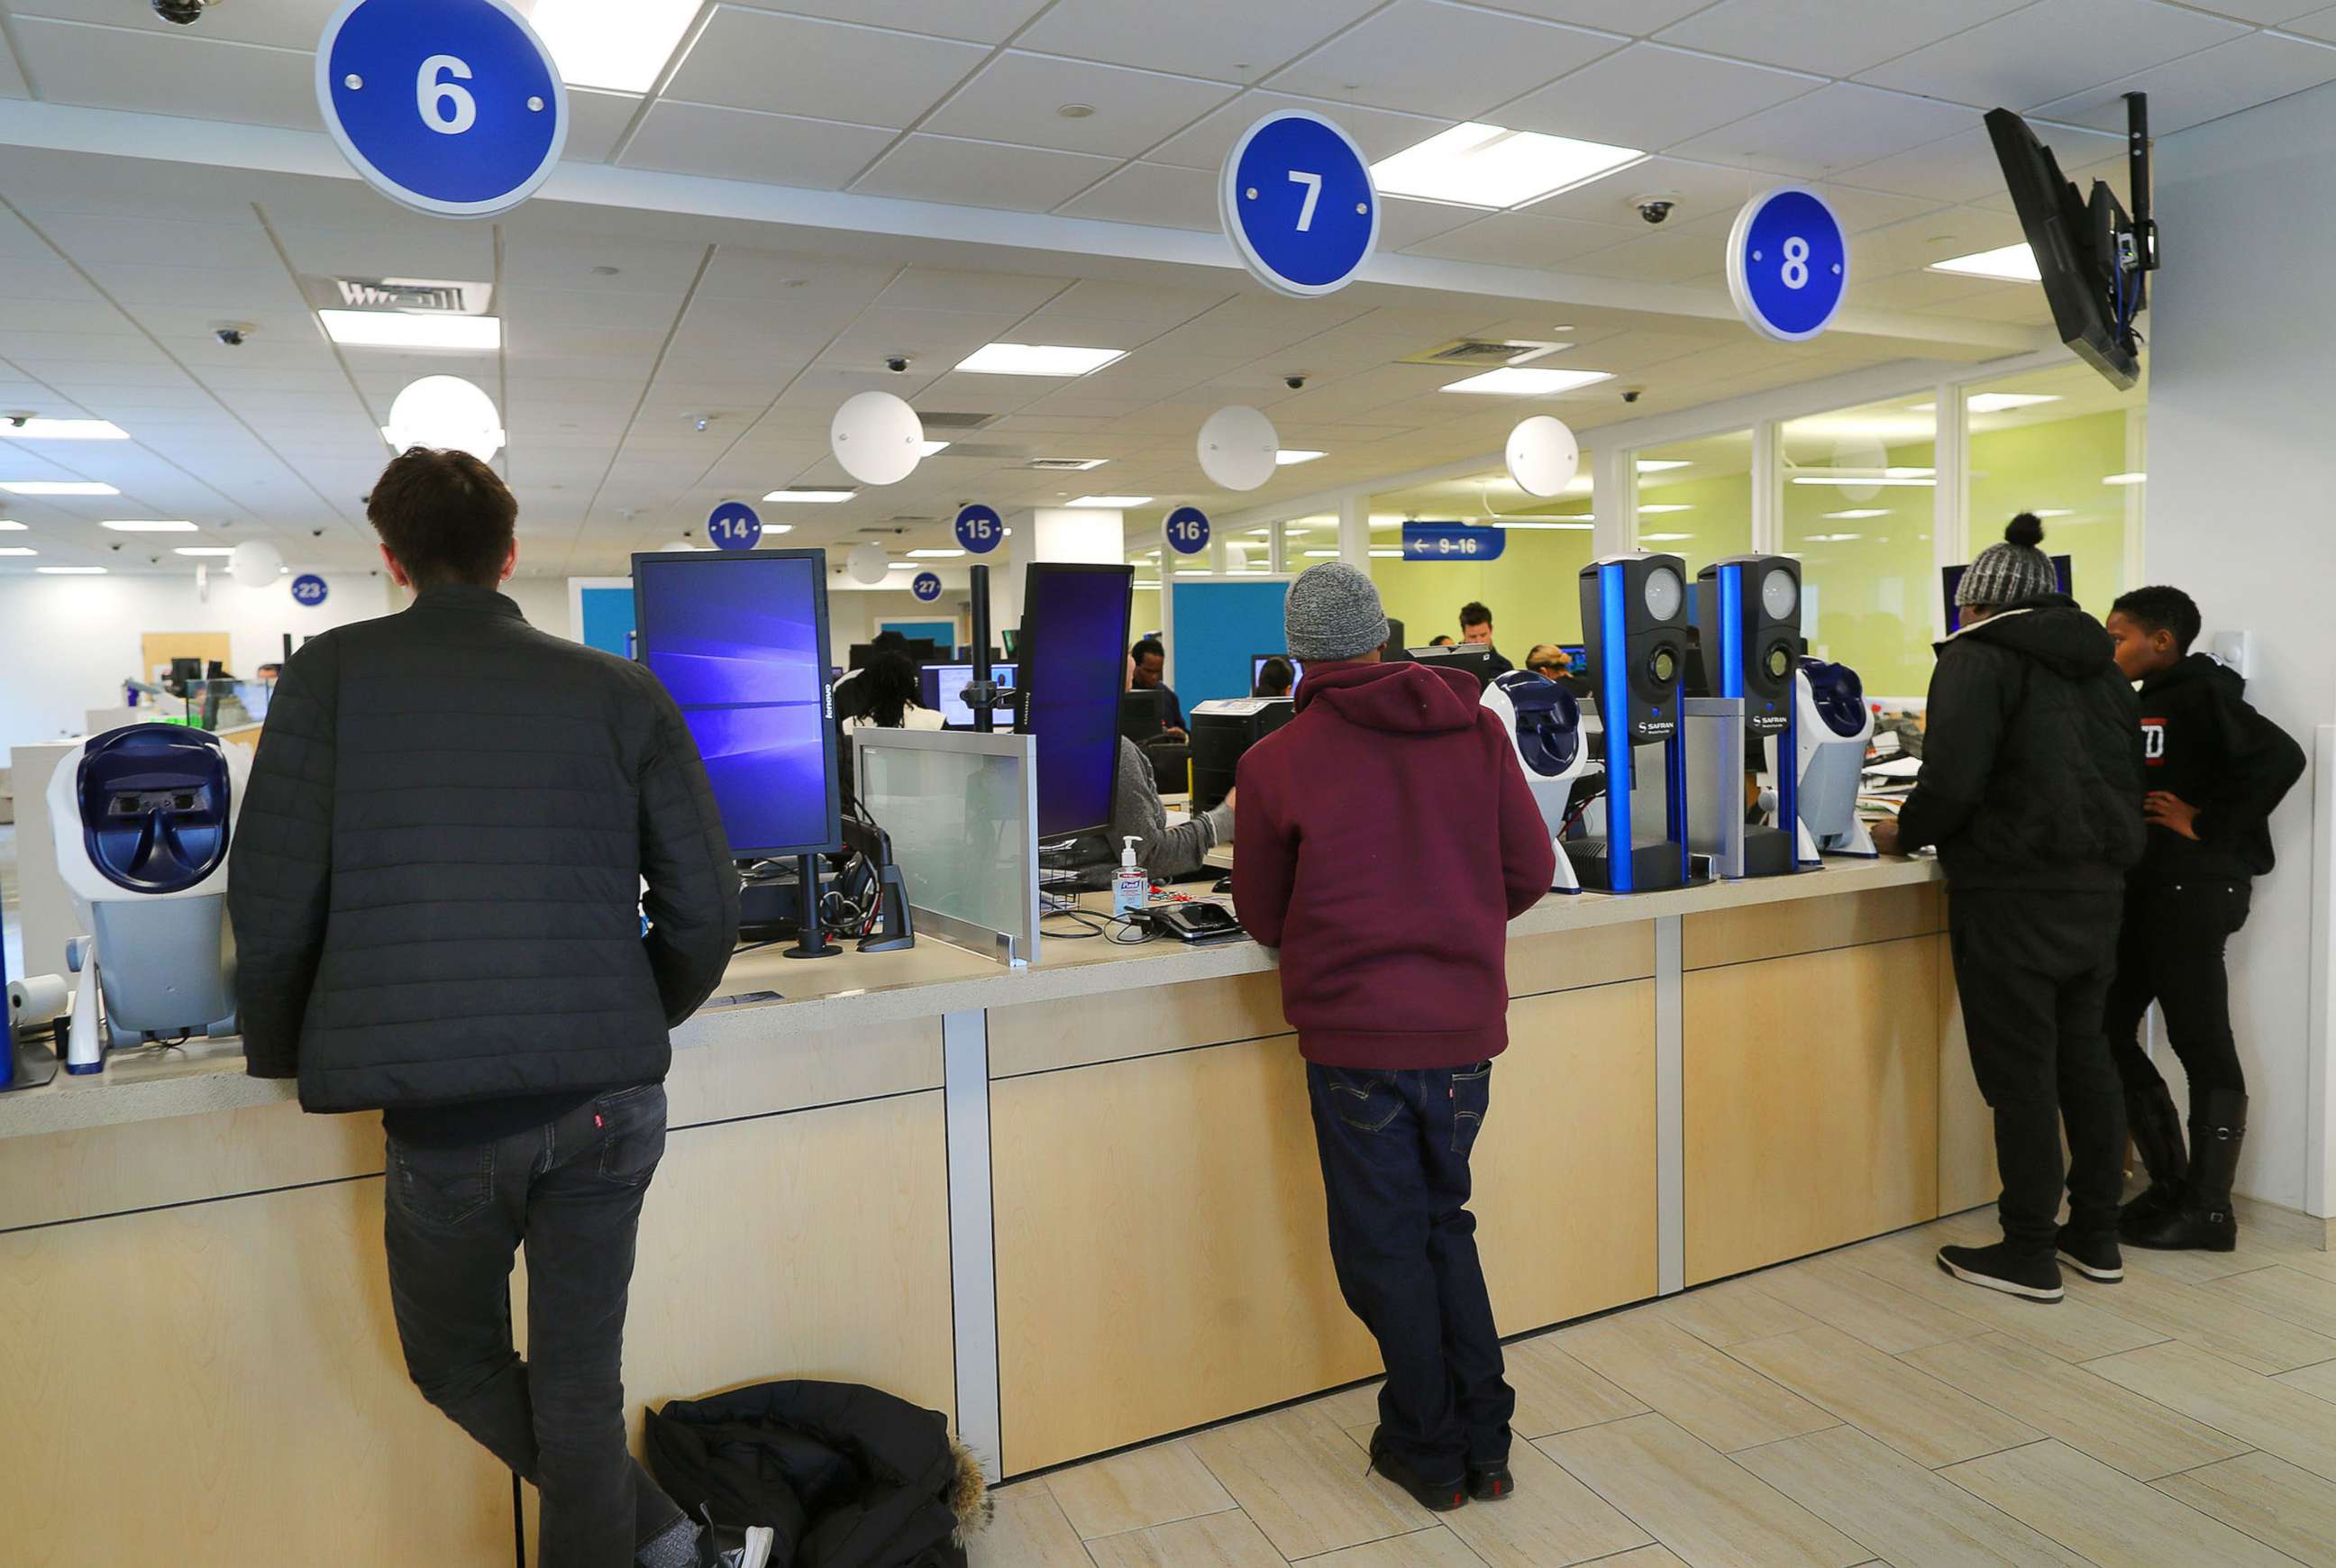 PHOTO: Customers wait to get their drivers licenses at a counter in the Haymarket Registry of Motor Vehicles office in Boston on March 21, 2018.